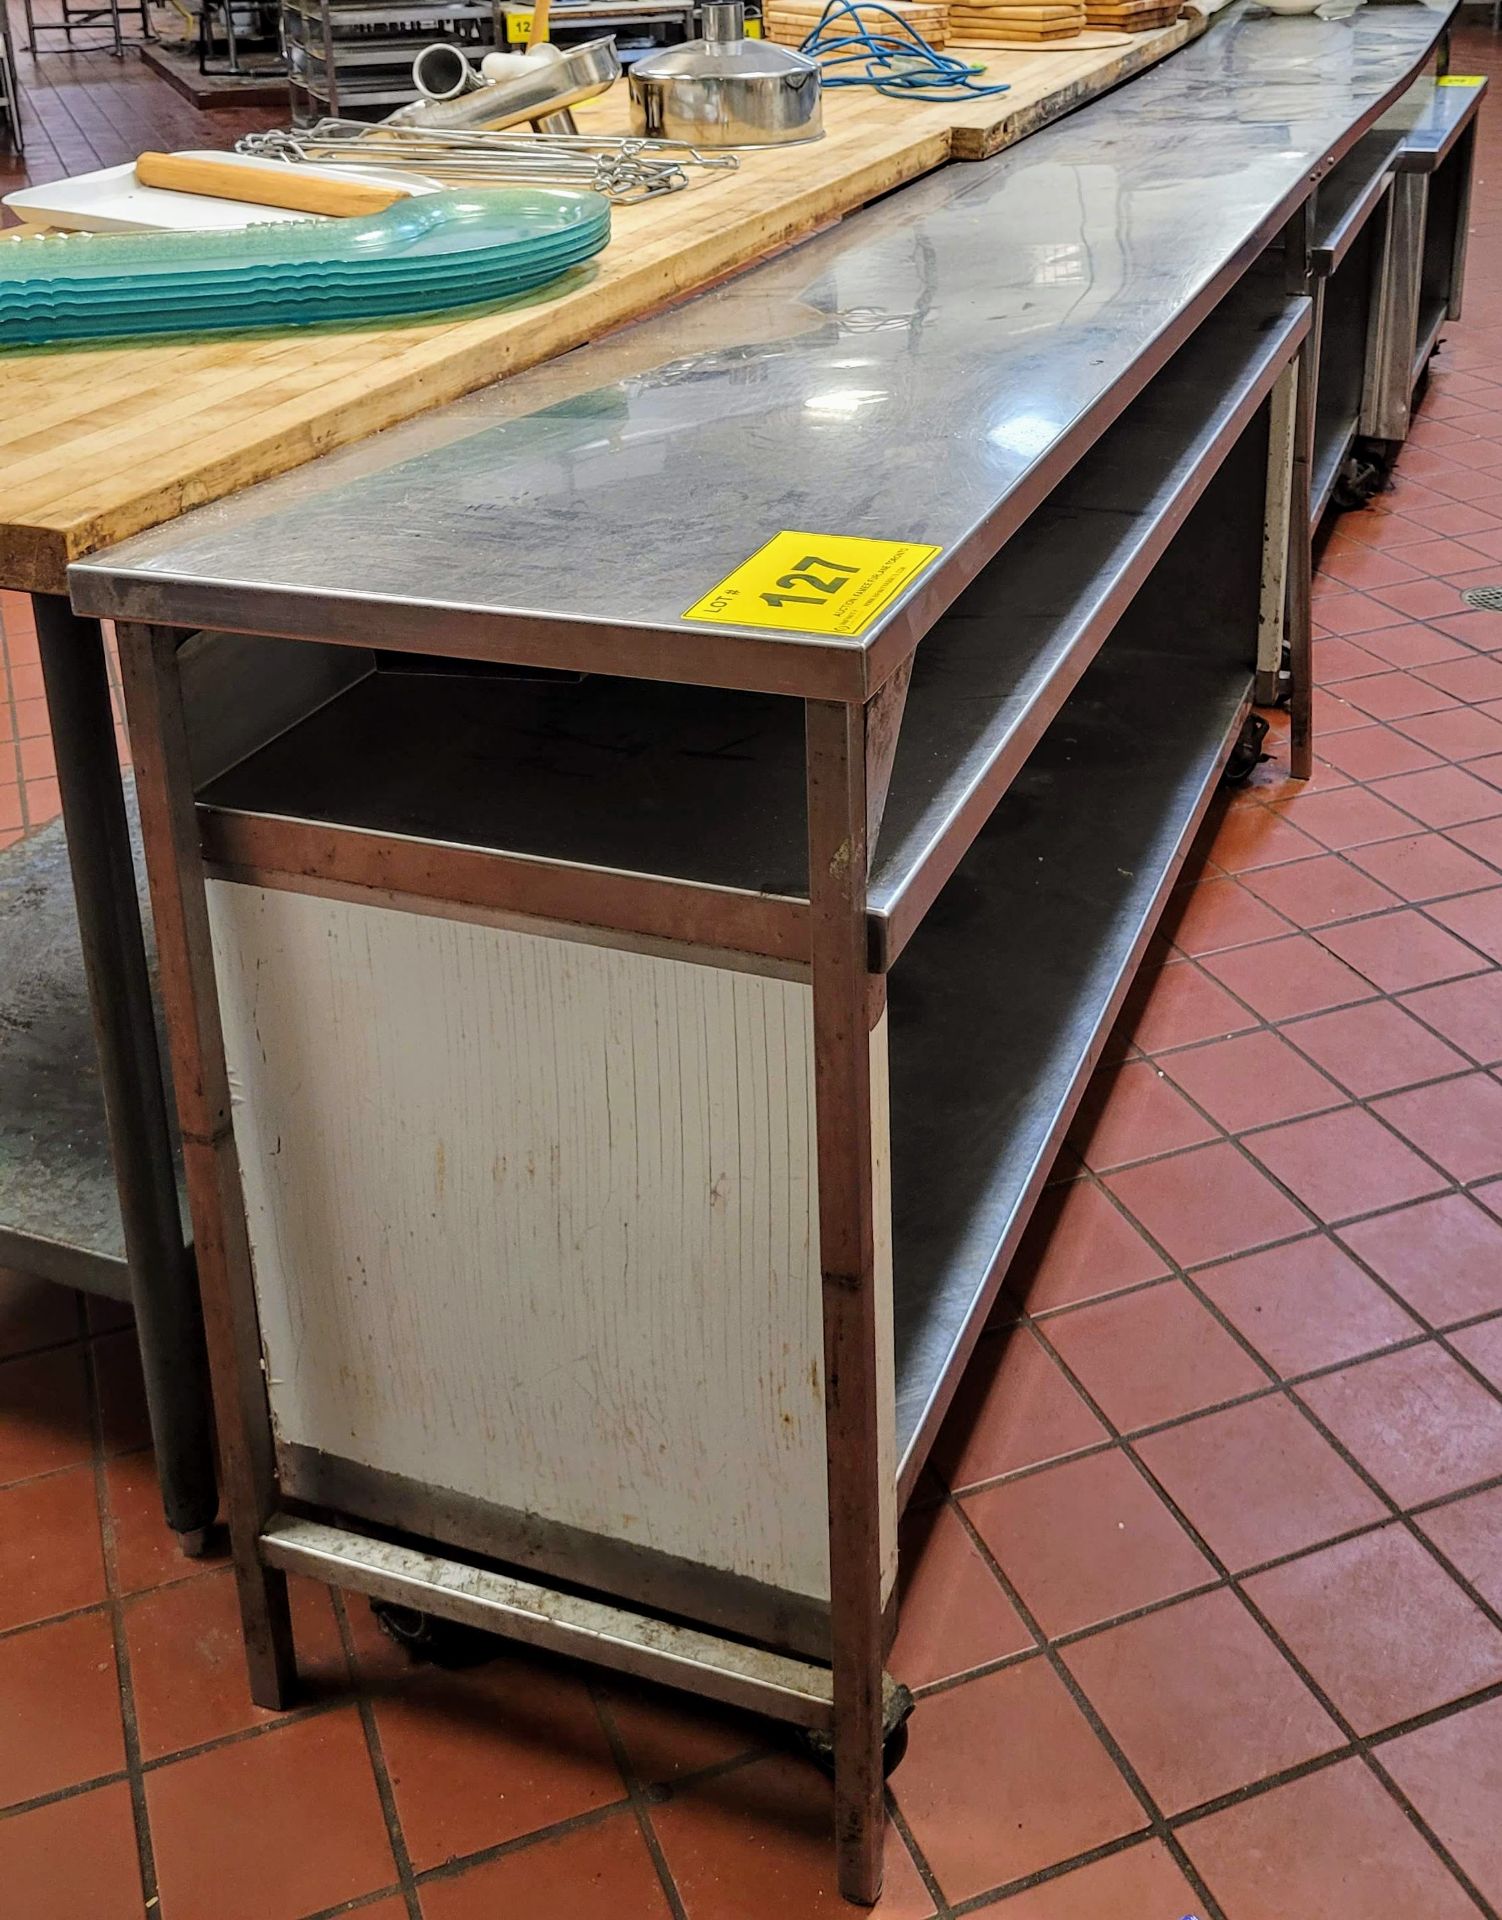 STAINLESS STEEL TABLE - (168"L X 20"W X 34"H)